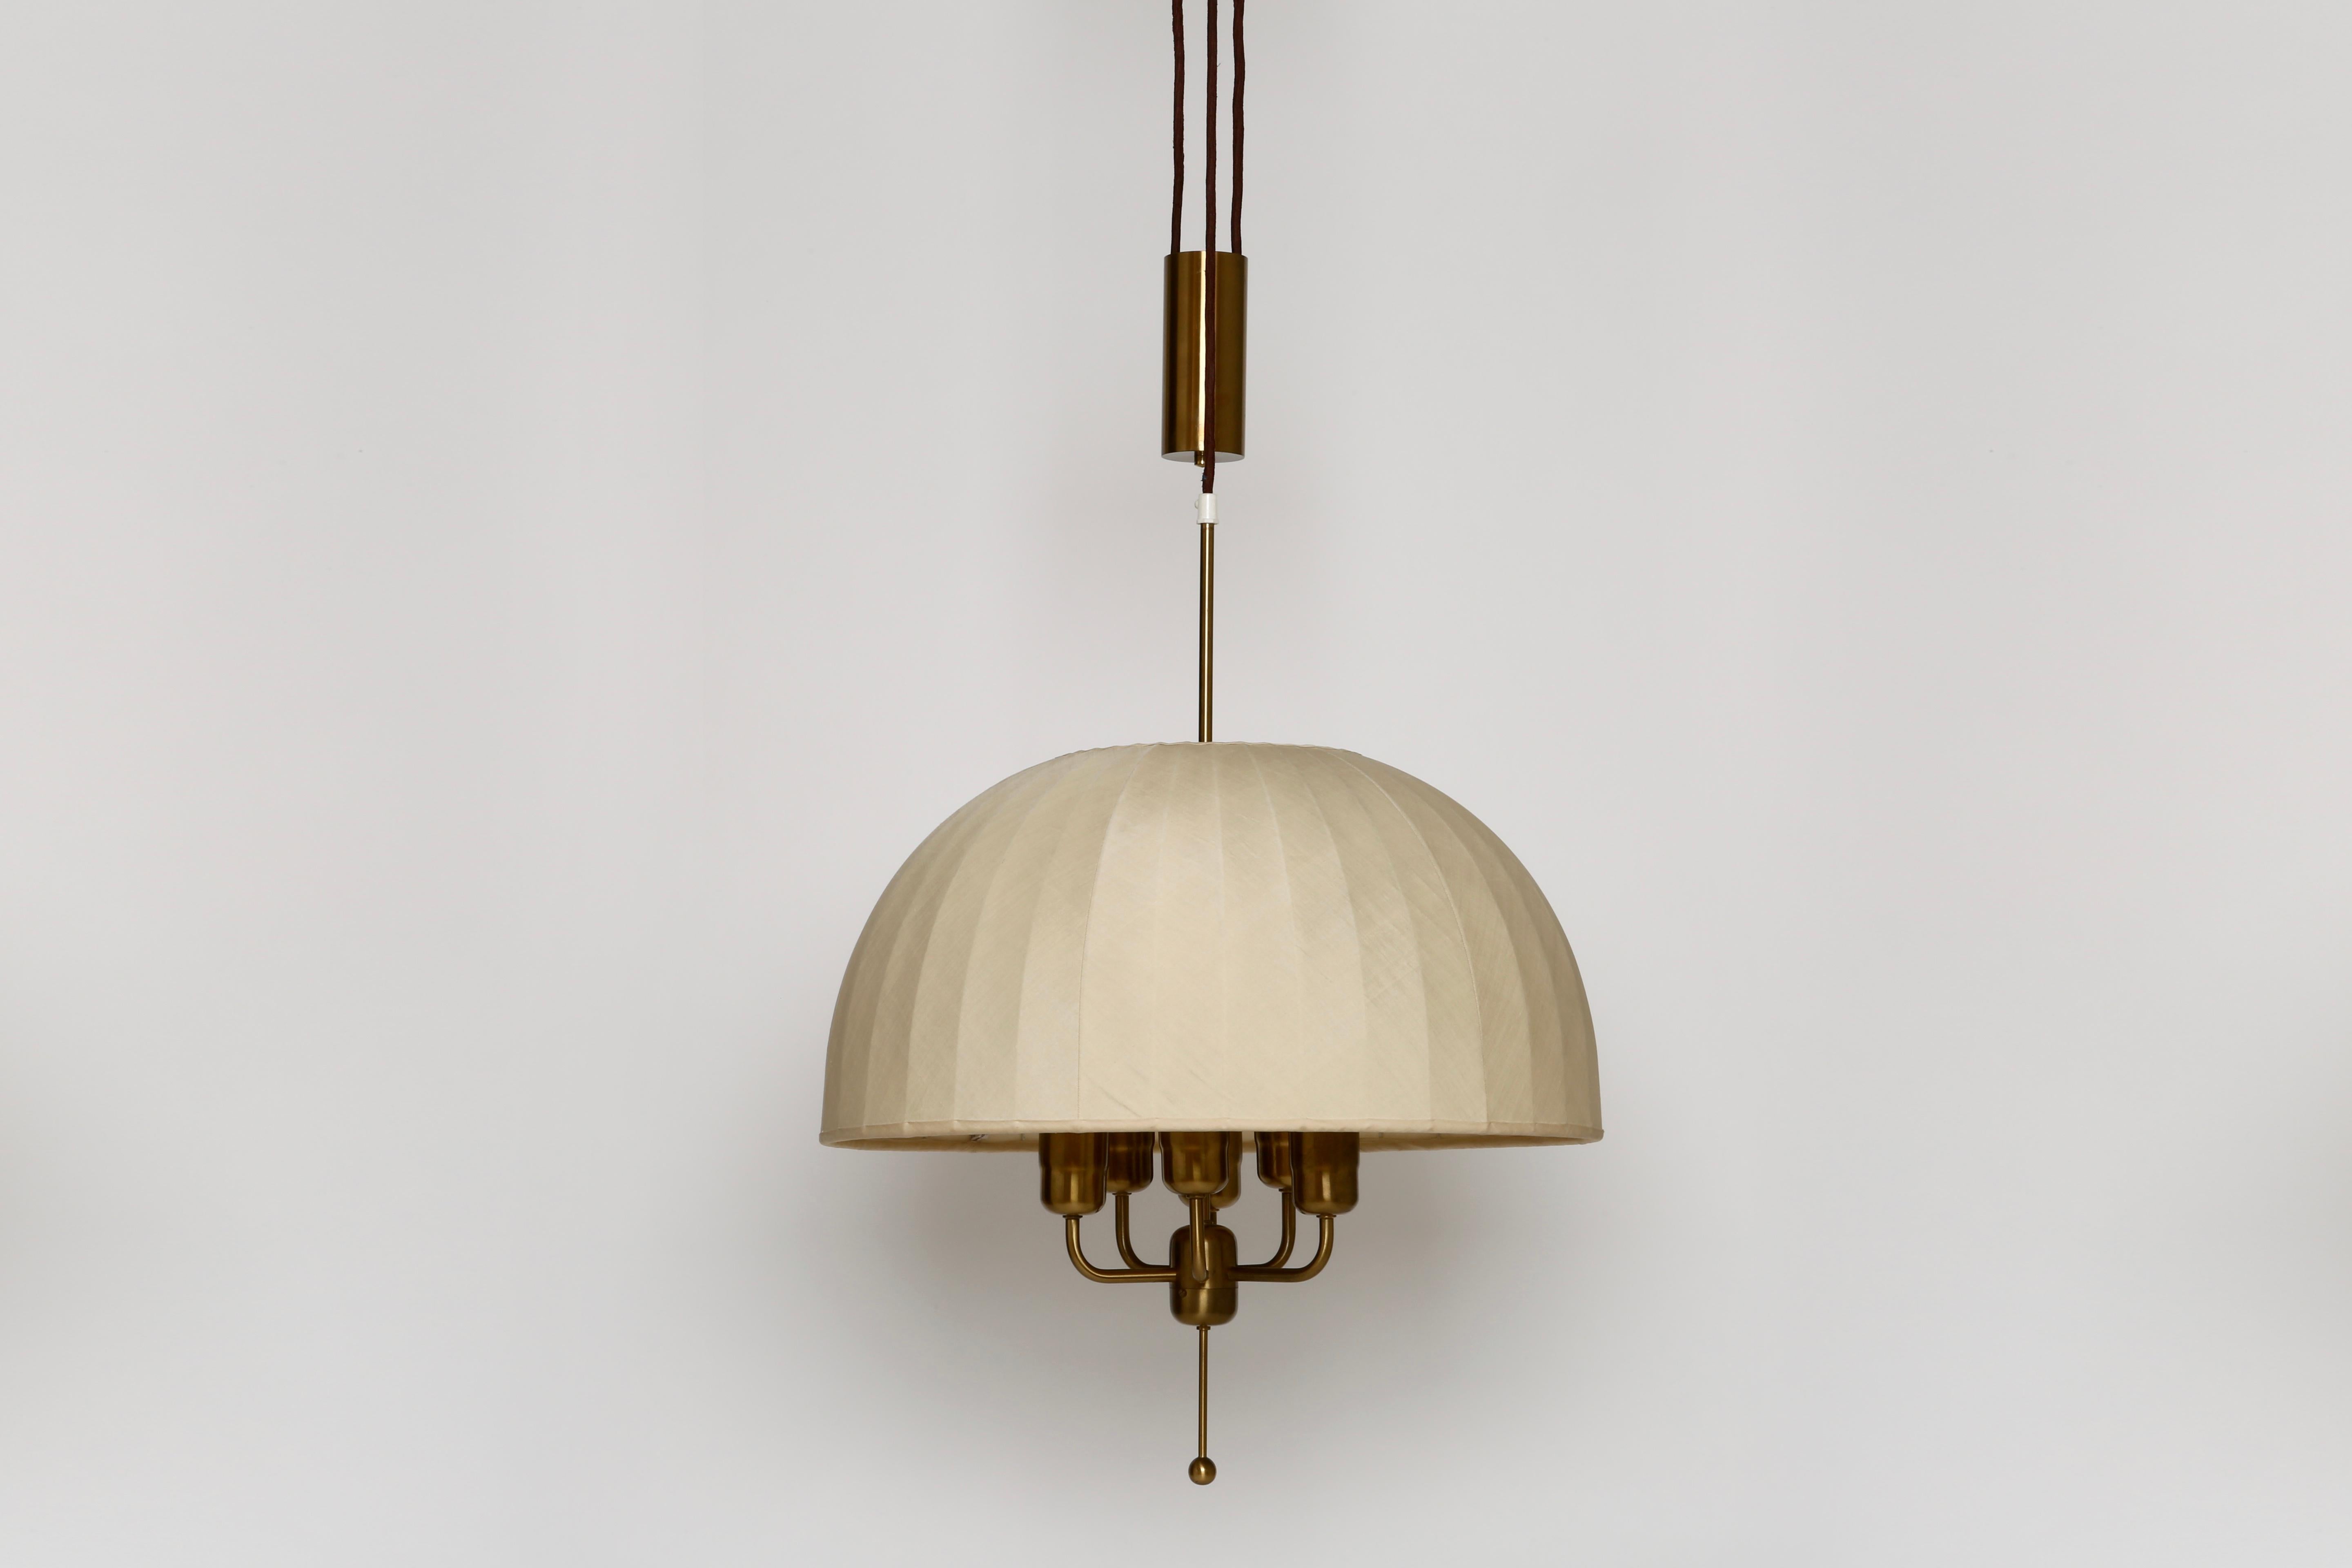 Hans-Agne Jakobsson counterbalance ceiling pendant.
Patinated brass. Large silk shade. Counterbalance weight.
Also available without counterbalance weight in a polished brass finish.
 